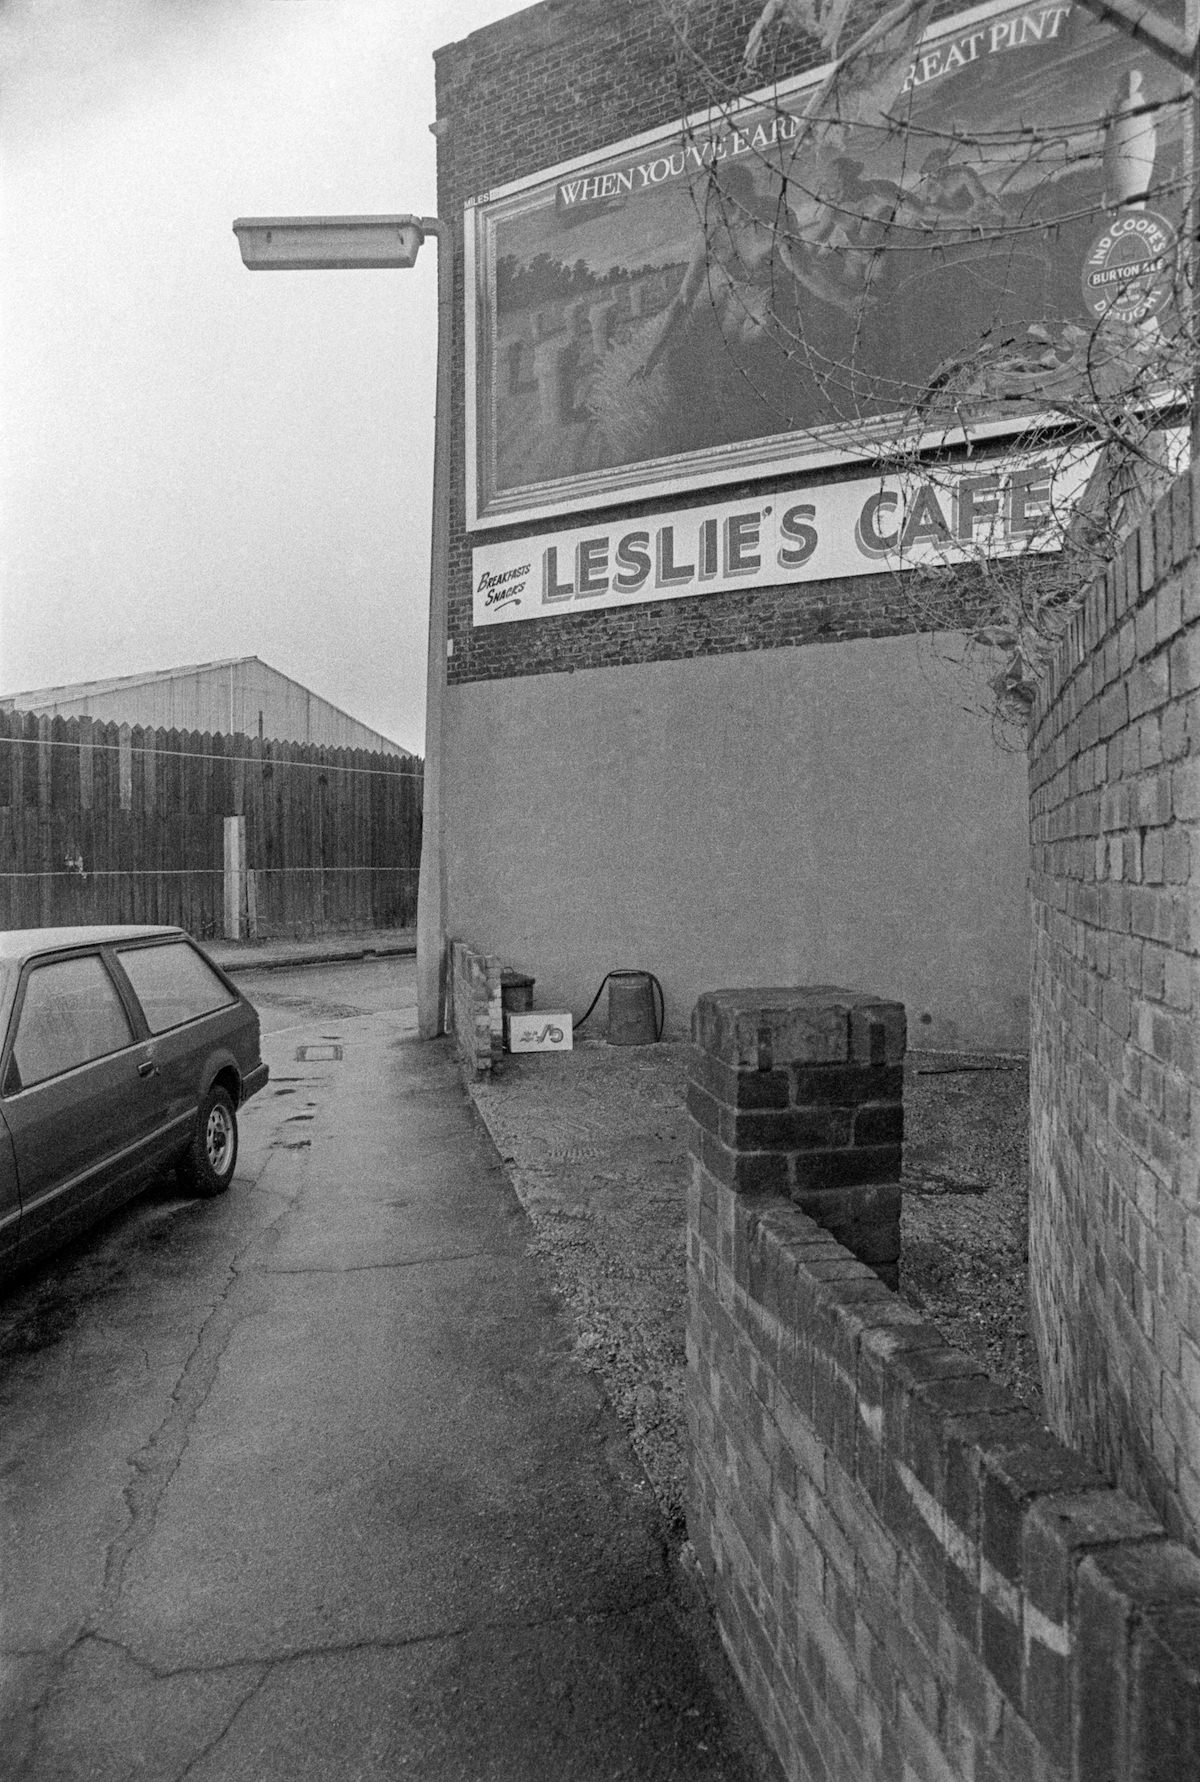 Leslie’s Cafe, Manchester Road, Isle of Dogs, Tower Hamlets, 1984